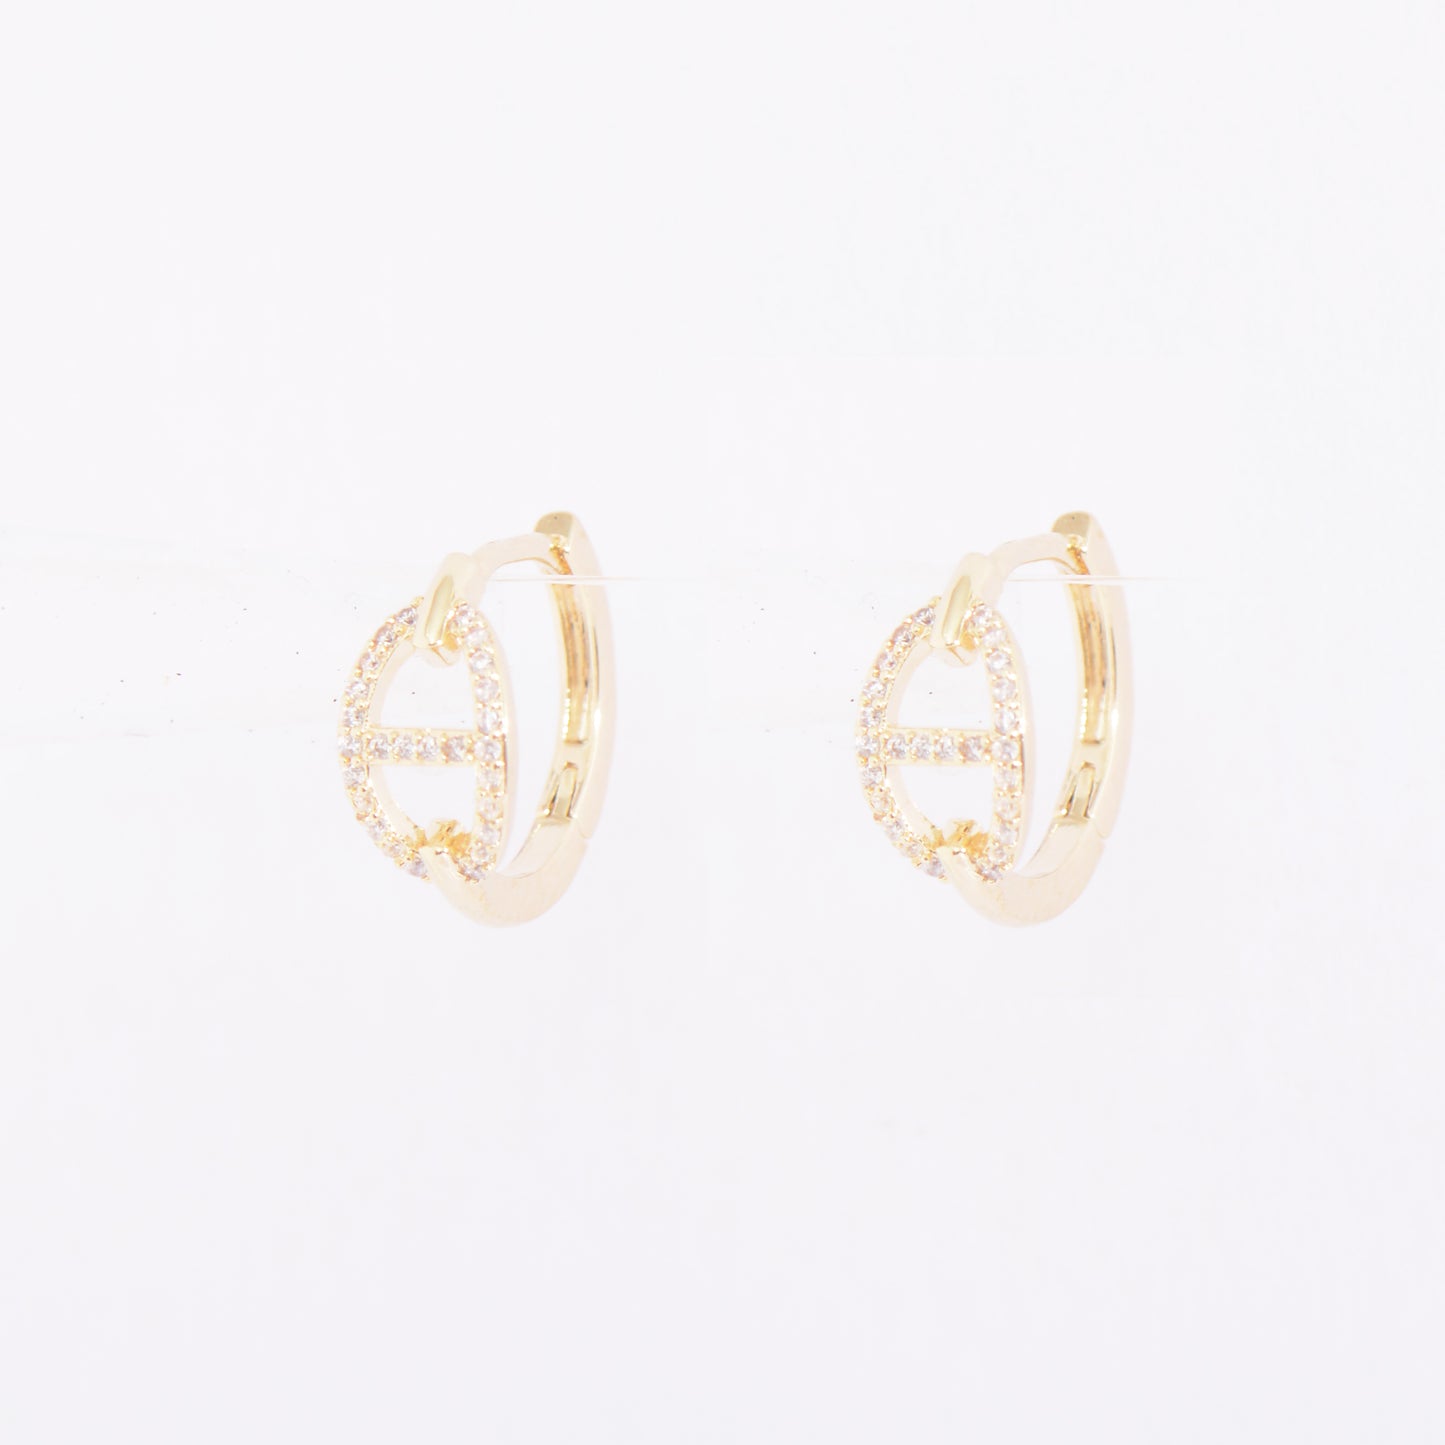 Unique Shape Gold Plated Small Hoop Earrings